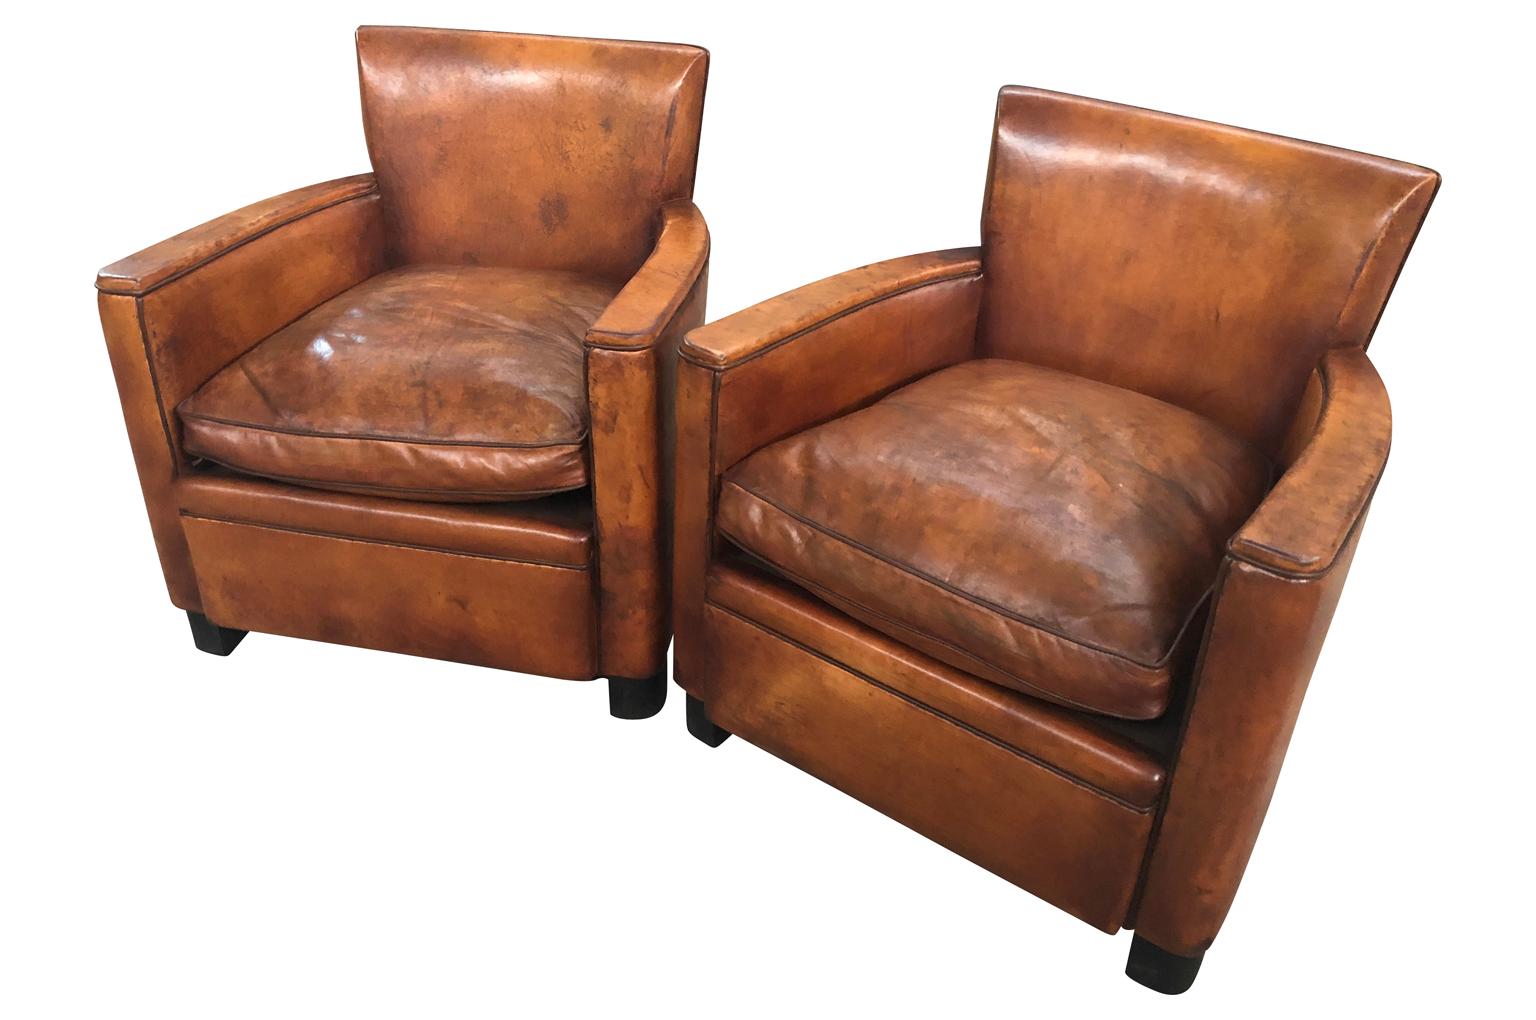 A very handsome pair of mid-20th century Art Deco style club chairs. Constructed with a very minimalist design in beautiful leather and very comfortable. Measures: Seat height 17 3/4